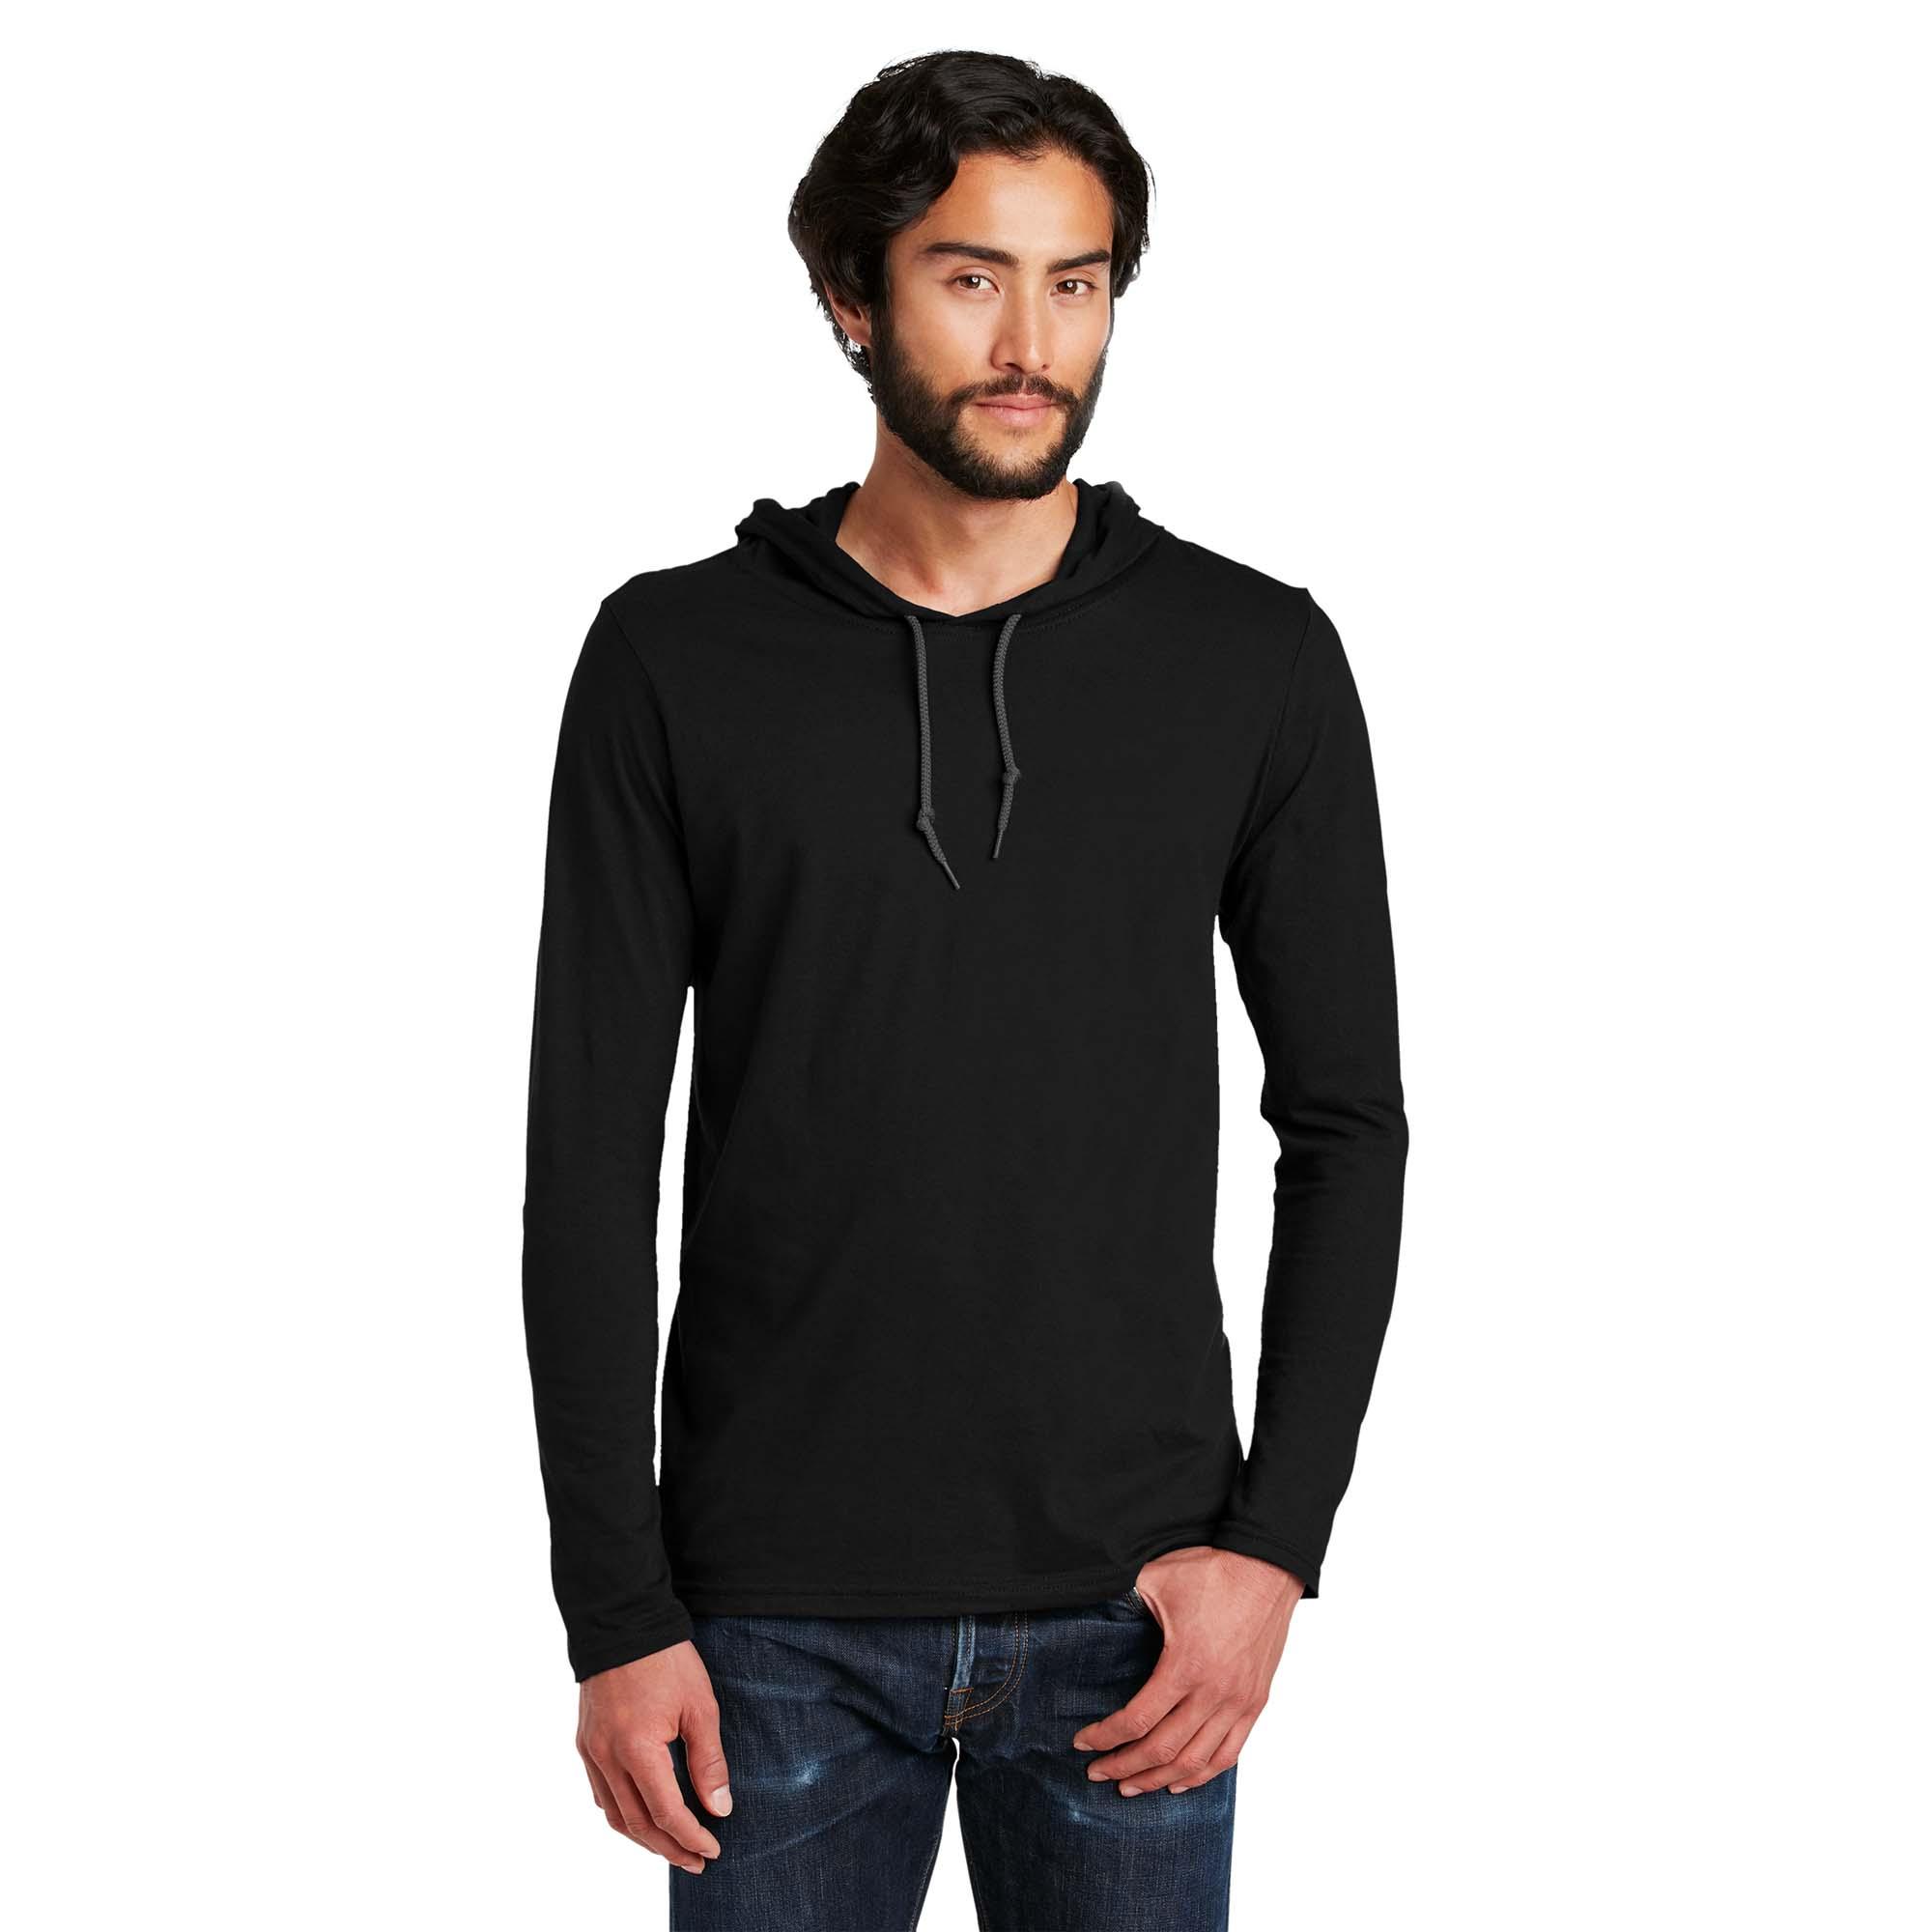 Anvil 987 100% Combed Ring Spun Cotton Long Sleeve Hooded T-Shirt